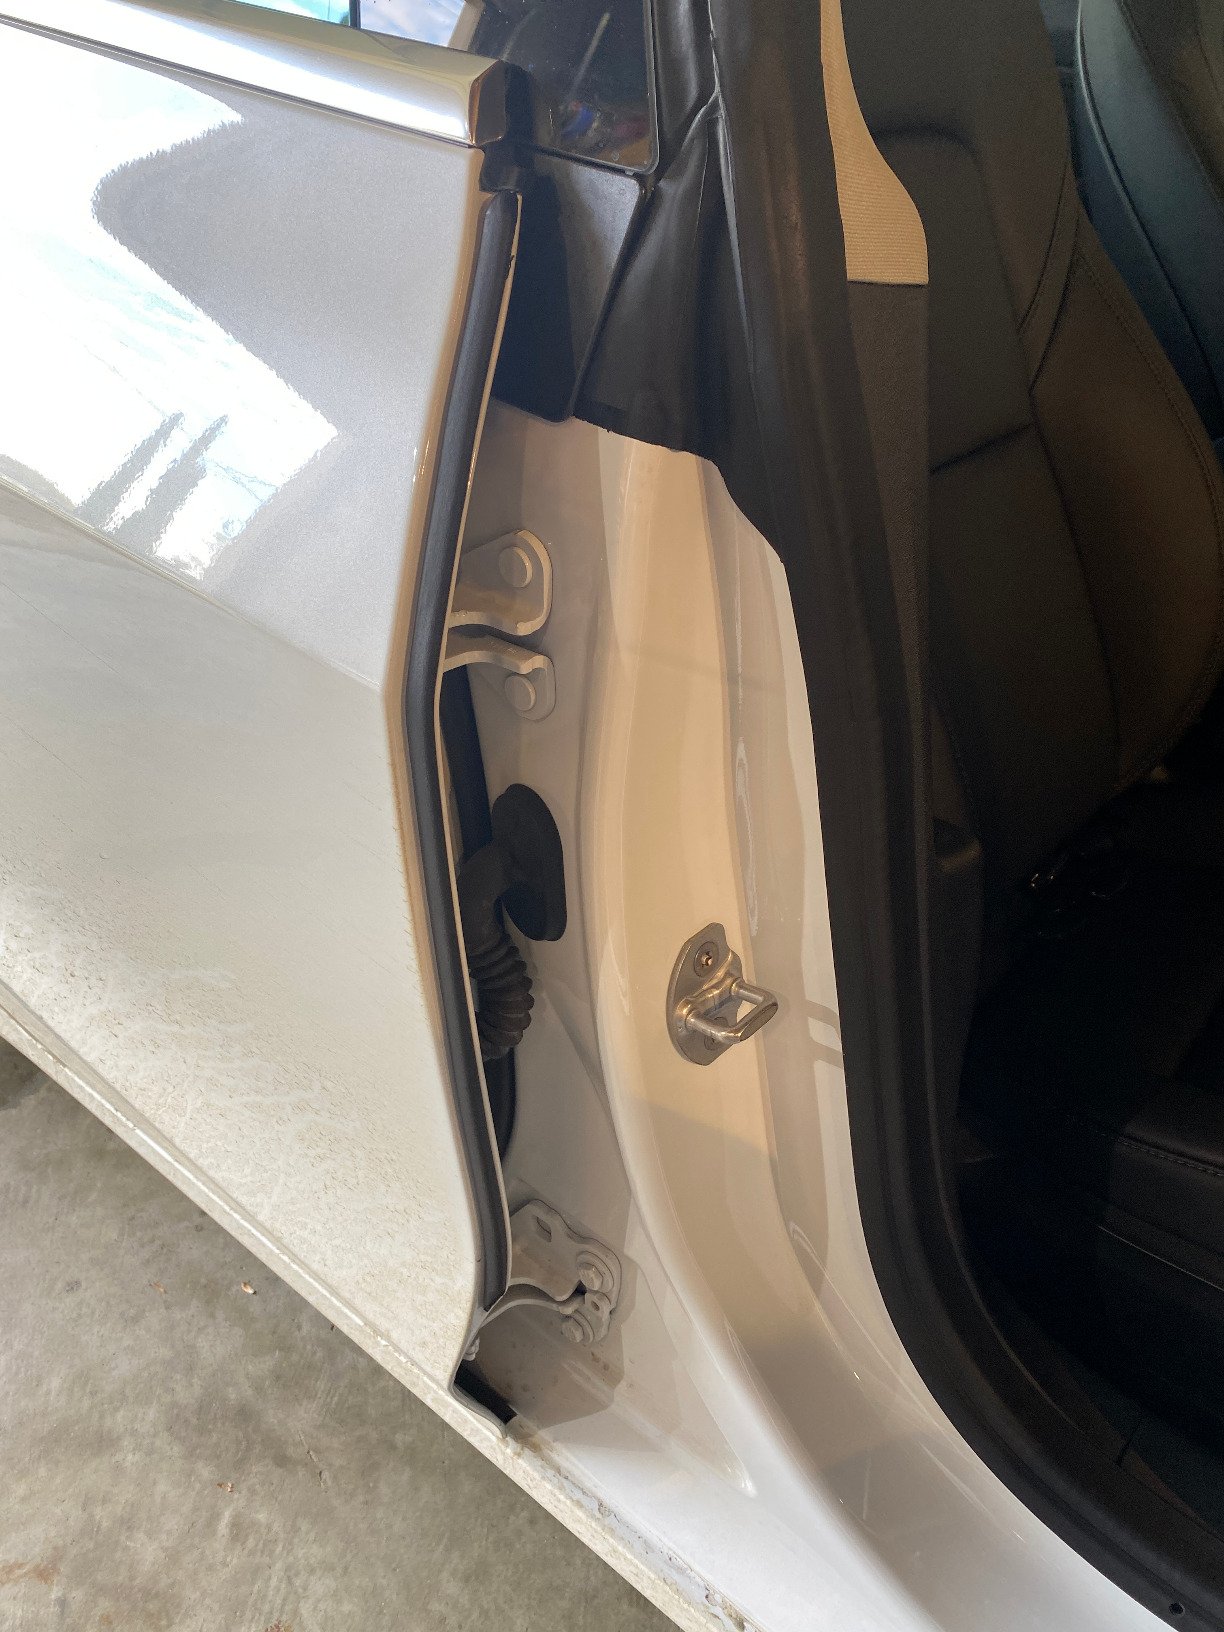 Vendor - The solution to Tesla Road Noise and Dust- Door seal